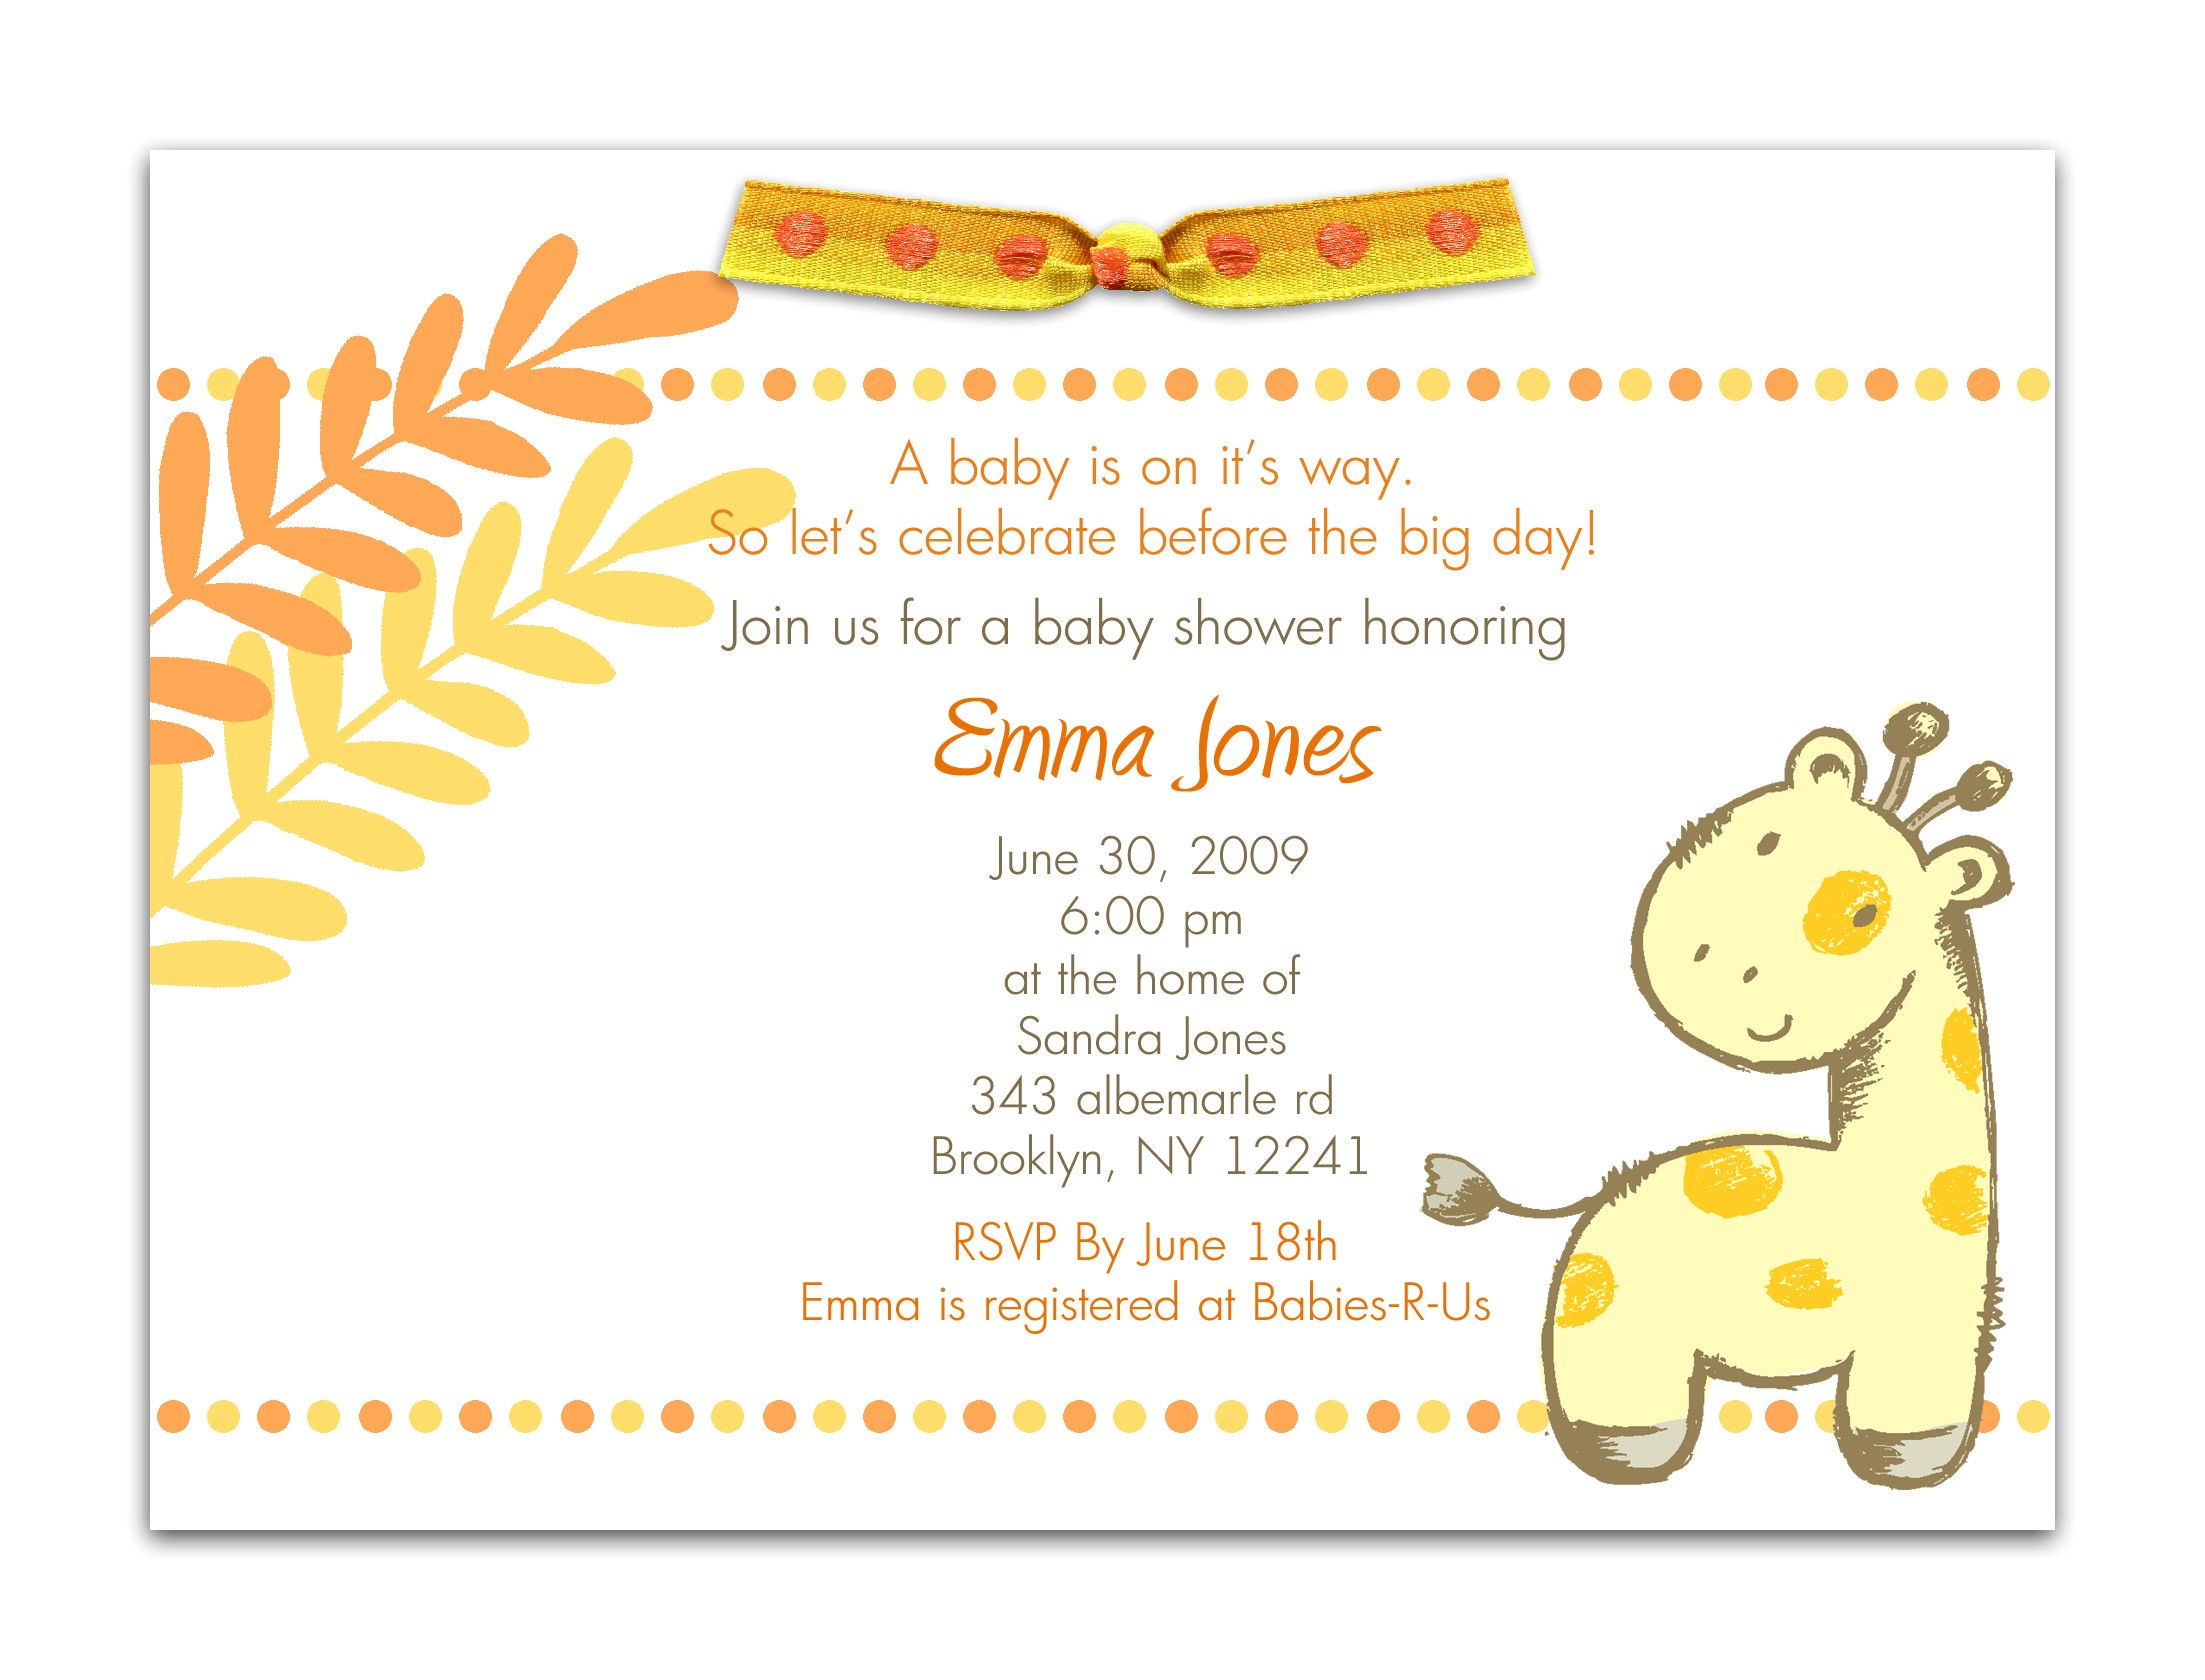 Cheap Baby Shower Invitations for Twins Cheap Baby Shower Invitations